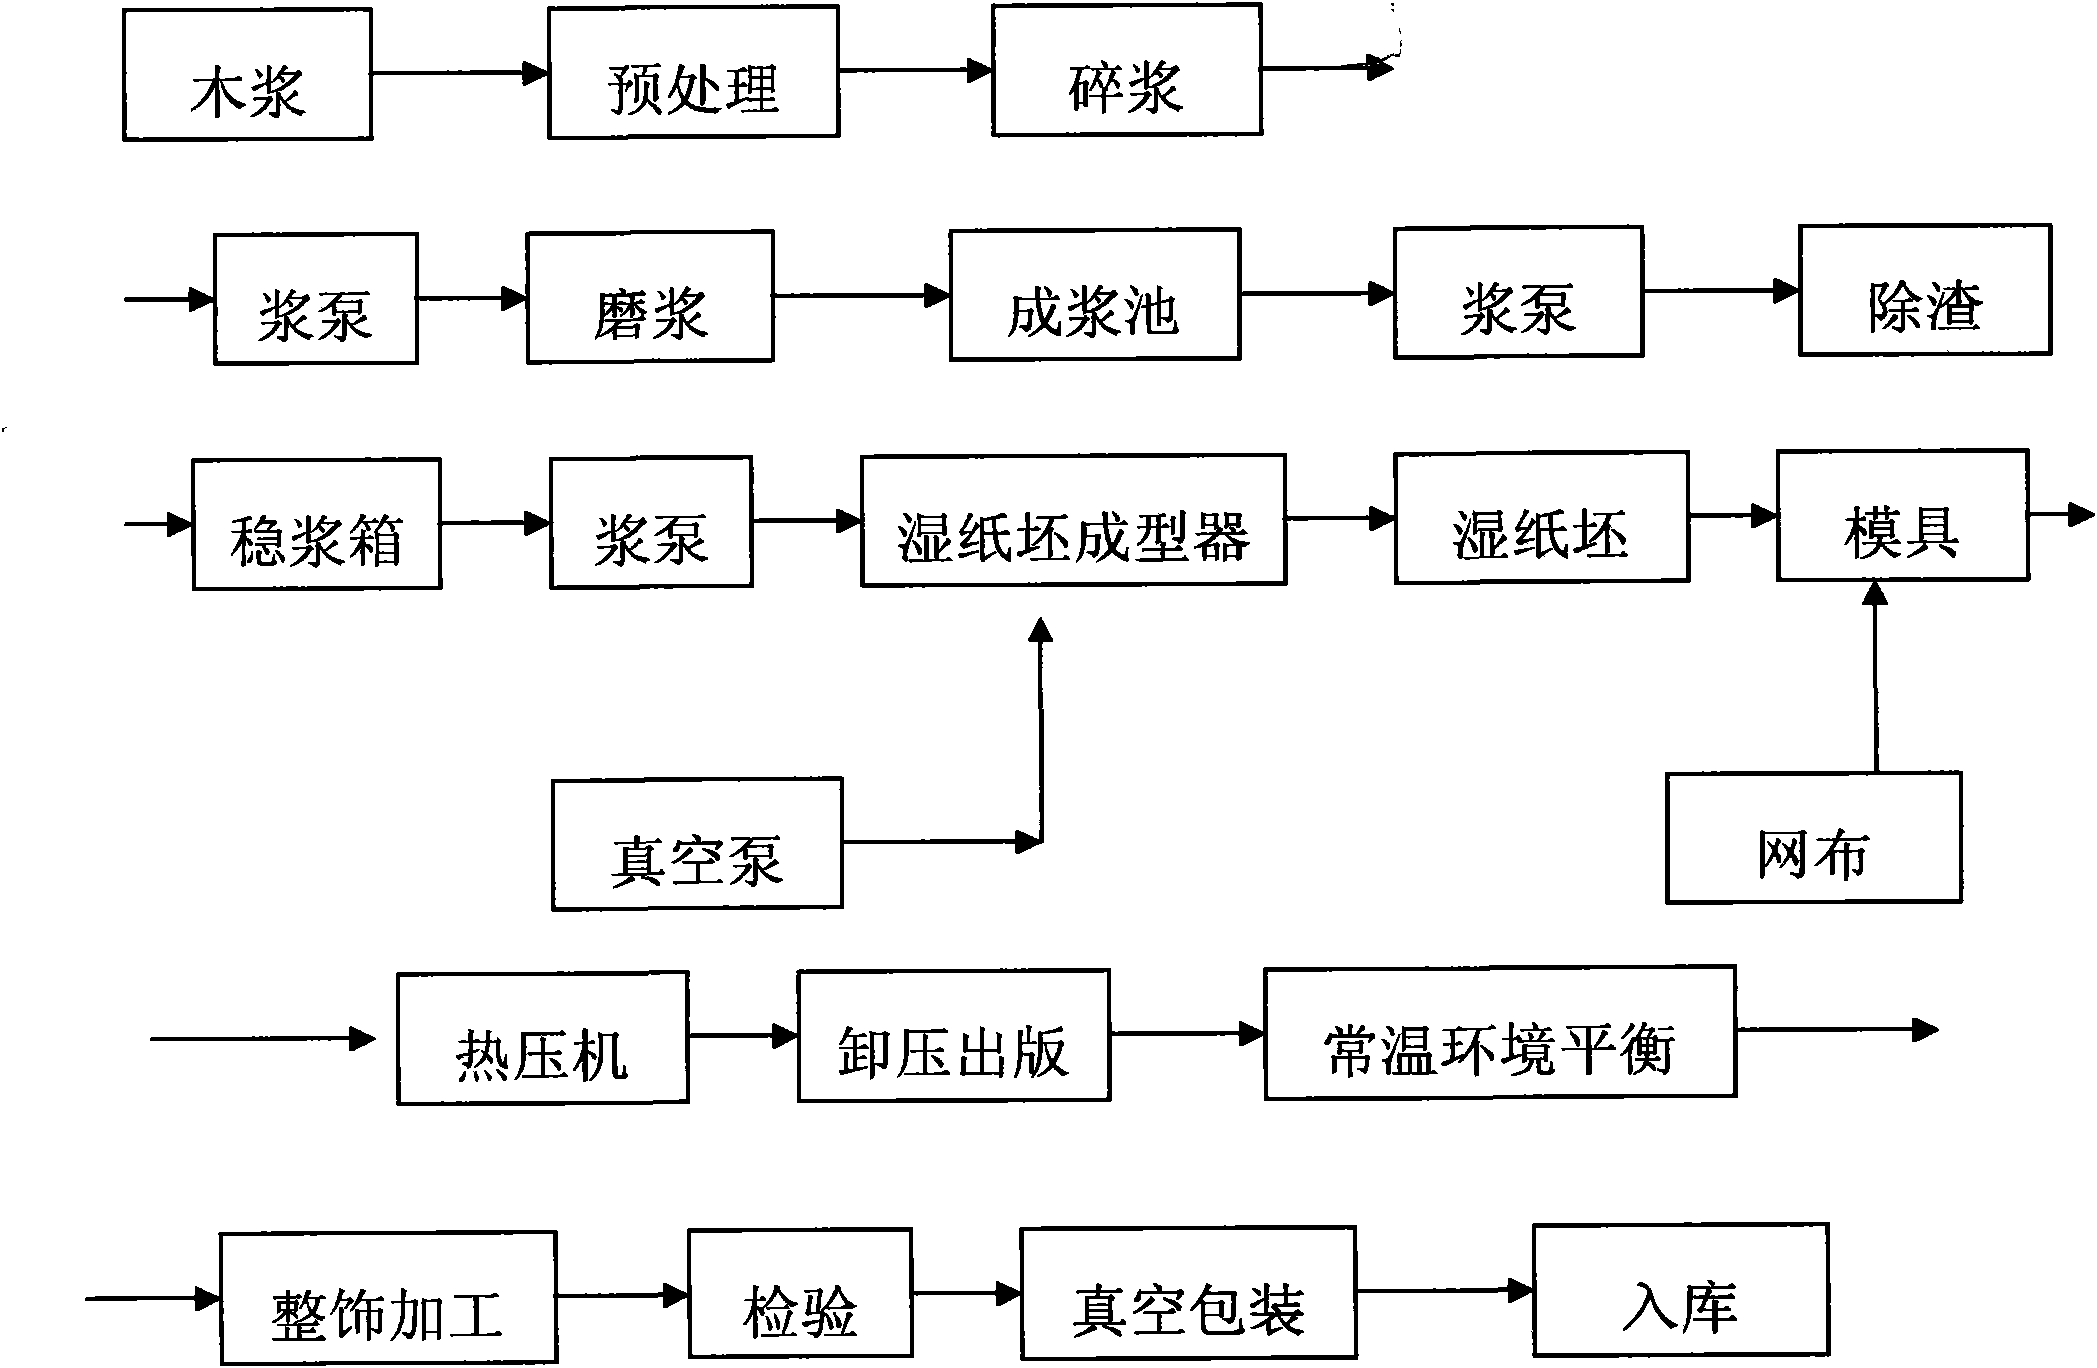 One-step molding support member production process